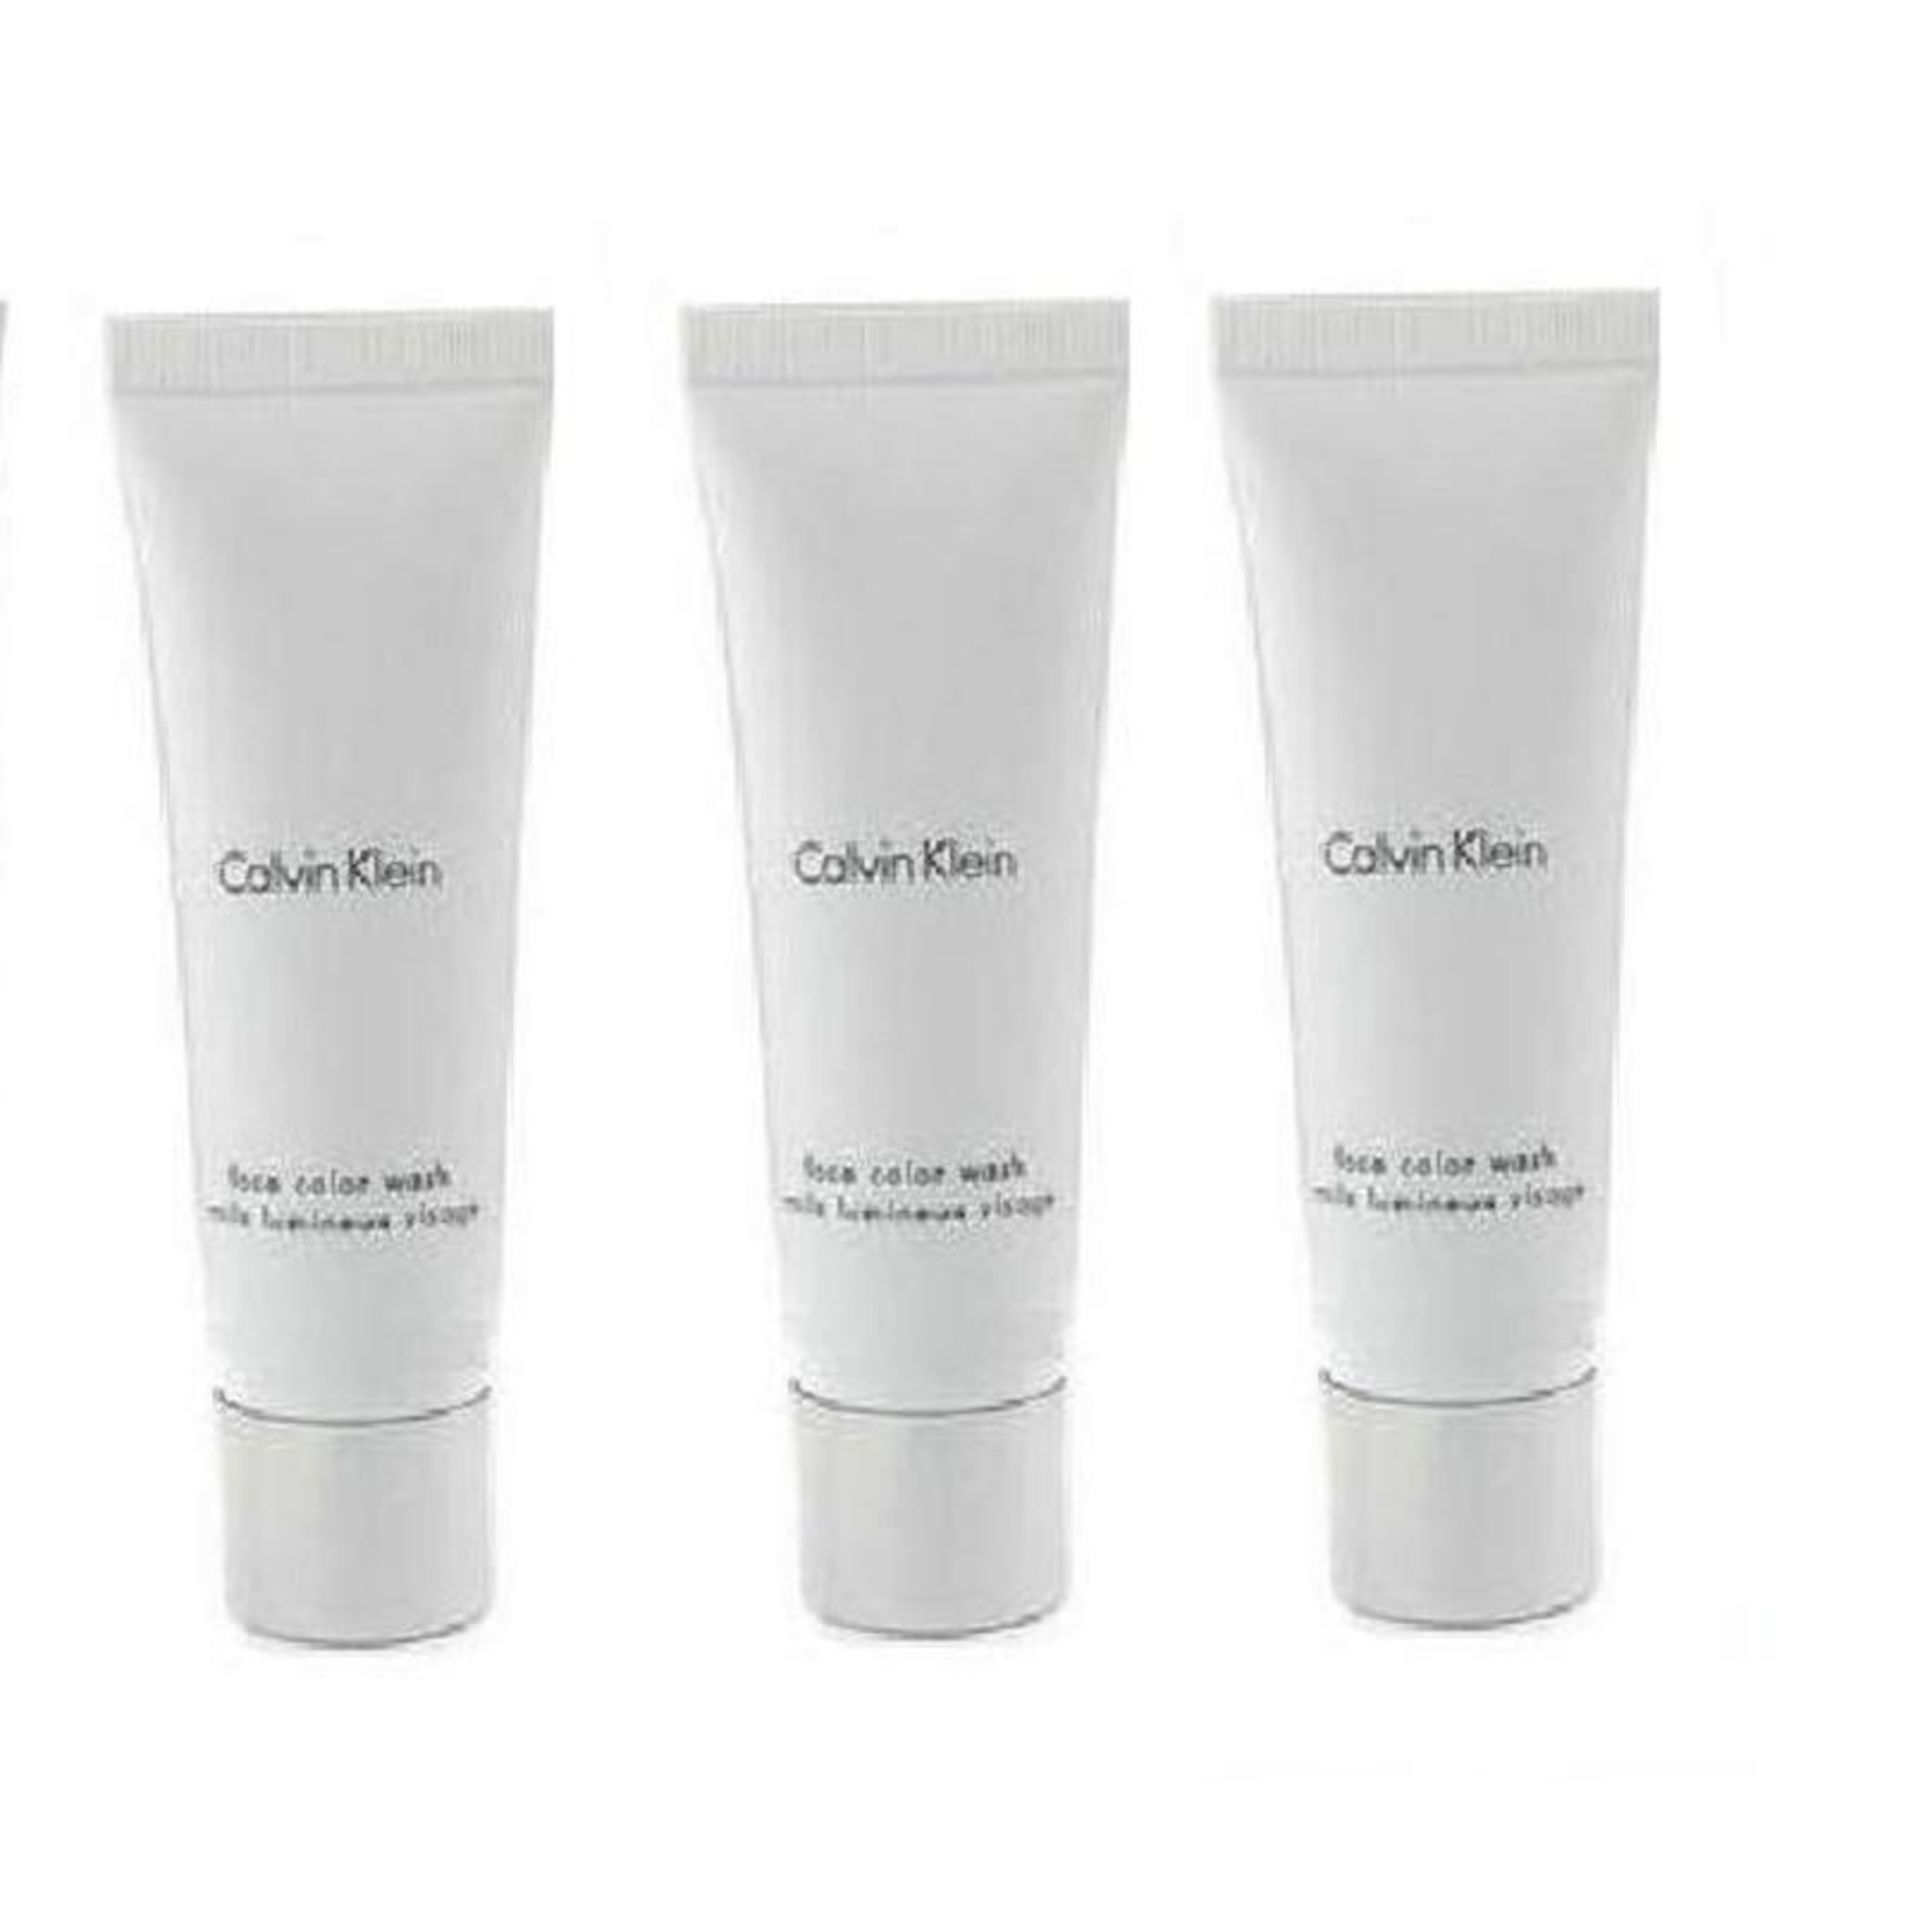 144 x Mini ck Colour Face Wash – Individually Boxed UK Delivery £15 – NO VAT